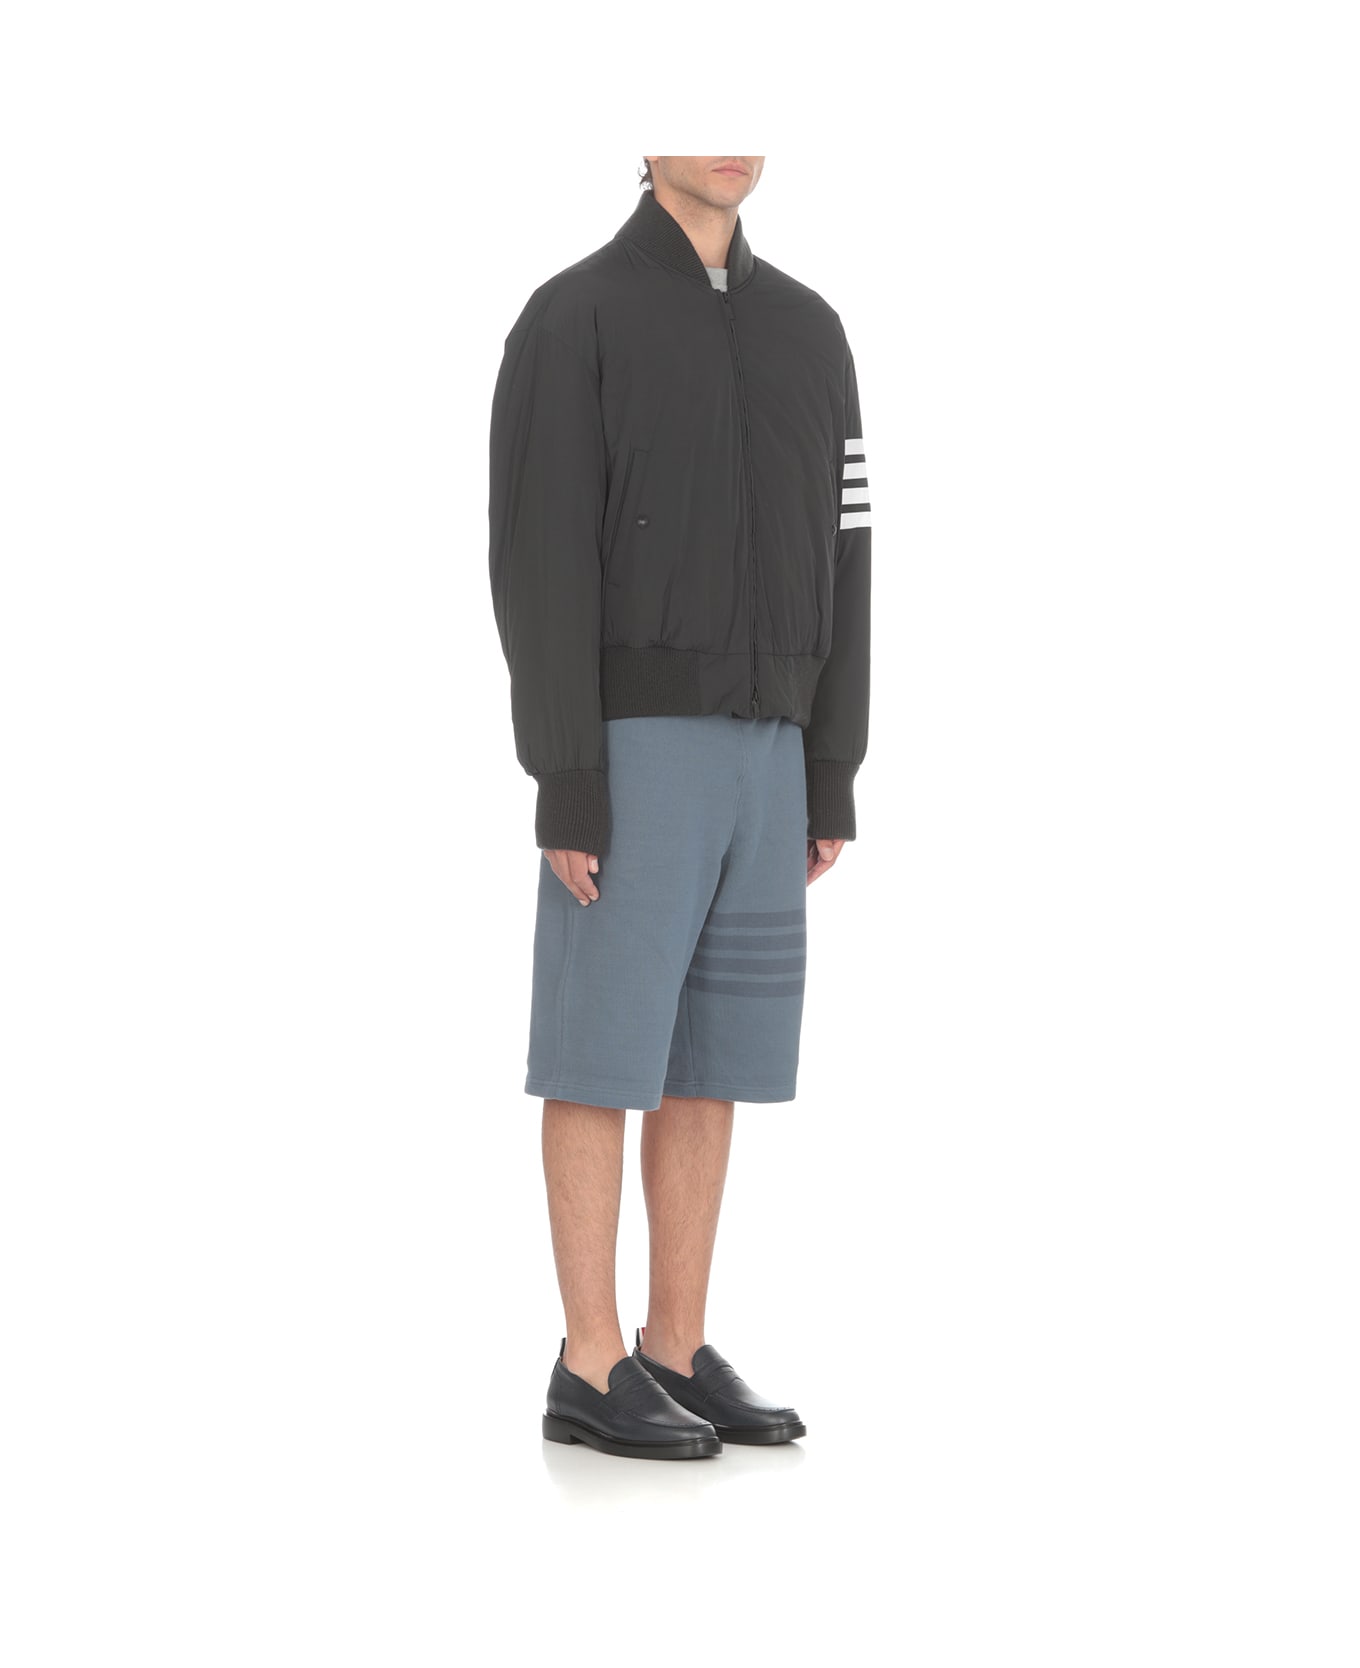 Thom Browne '4bar Down Fill Oversized' Bomber Jacket - Grey